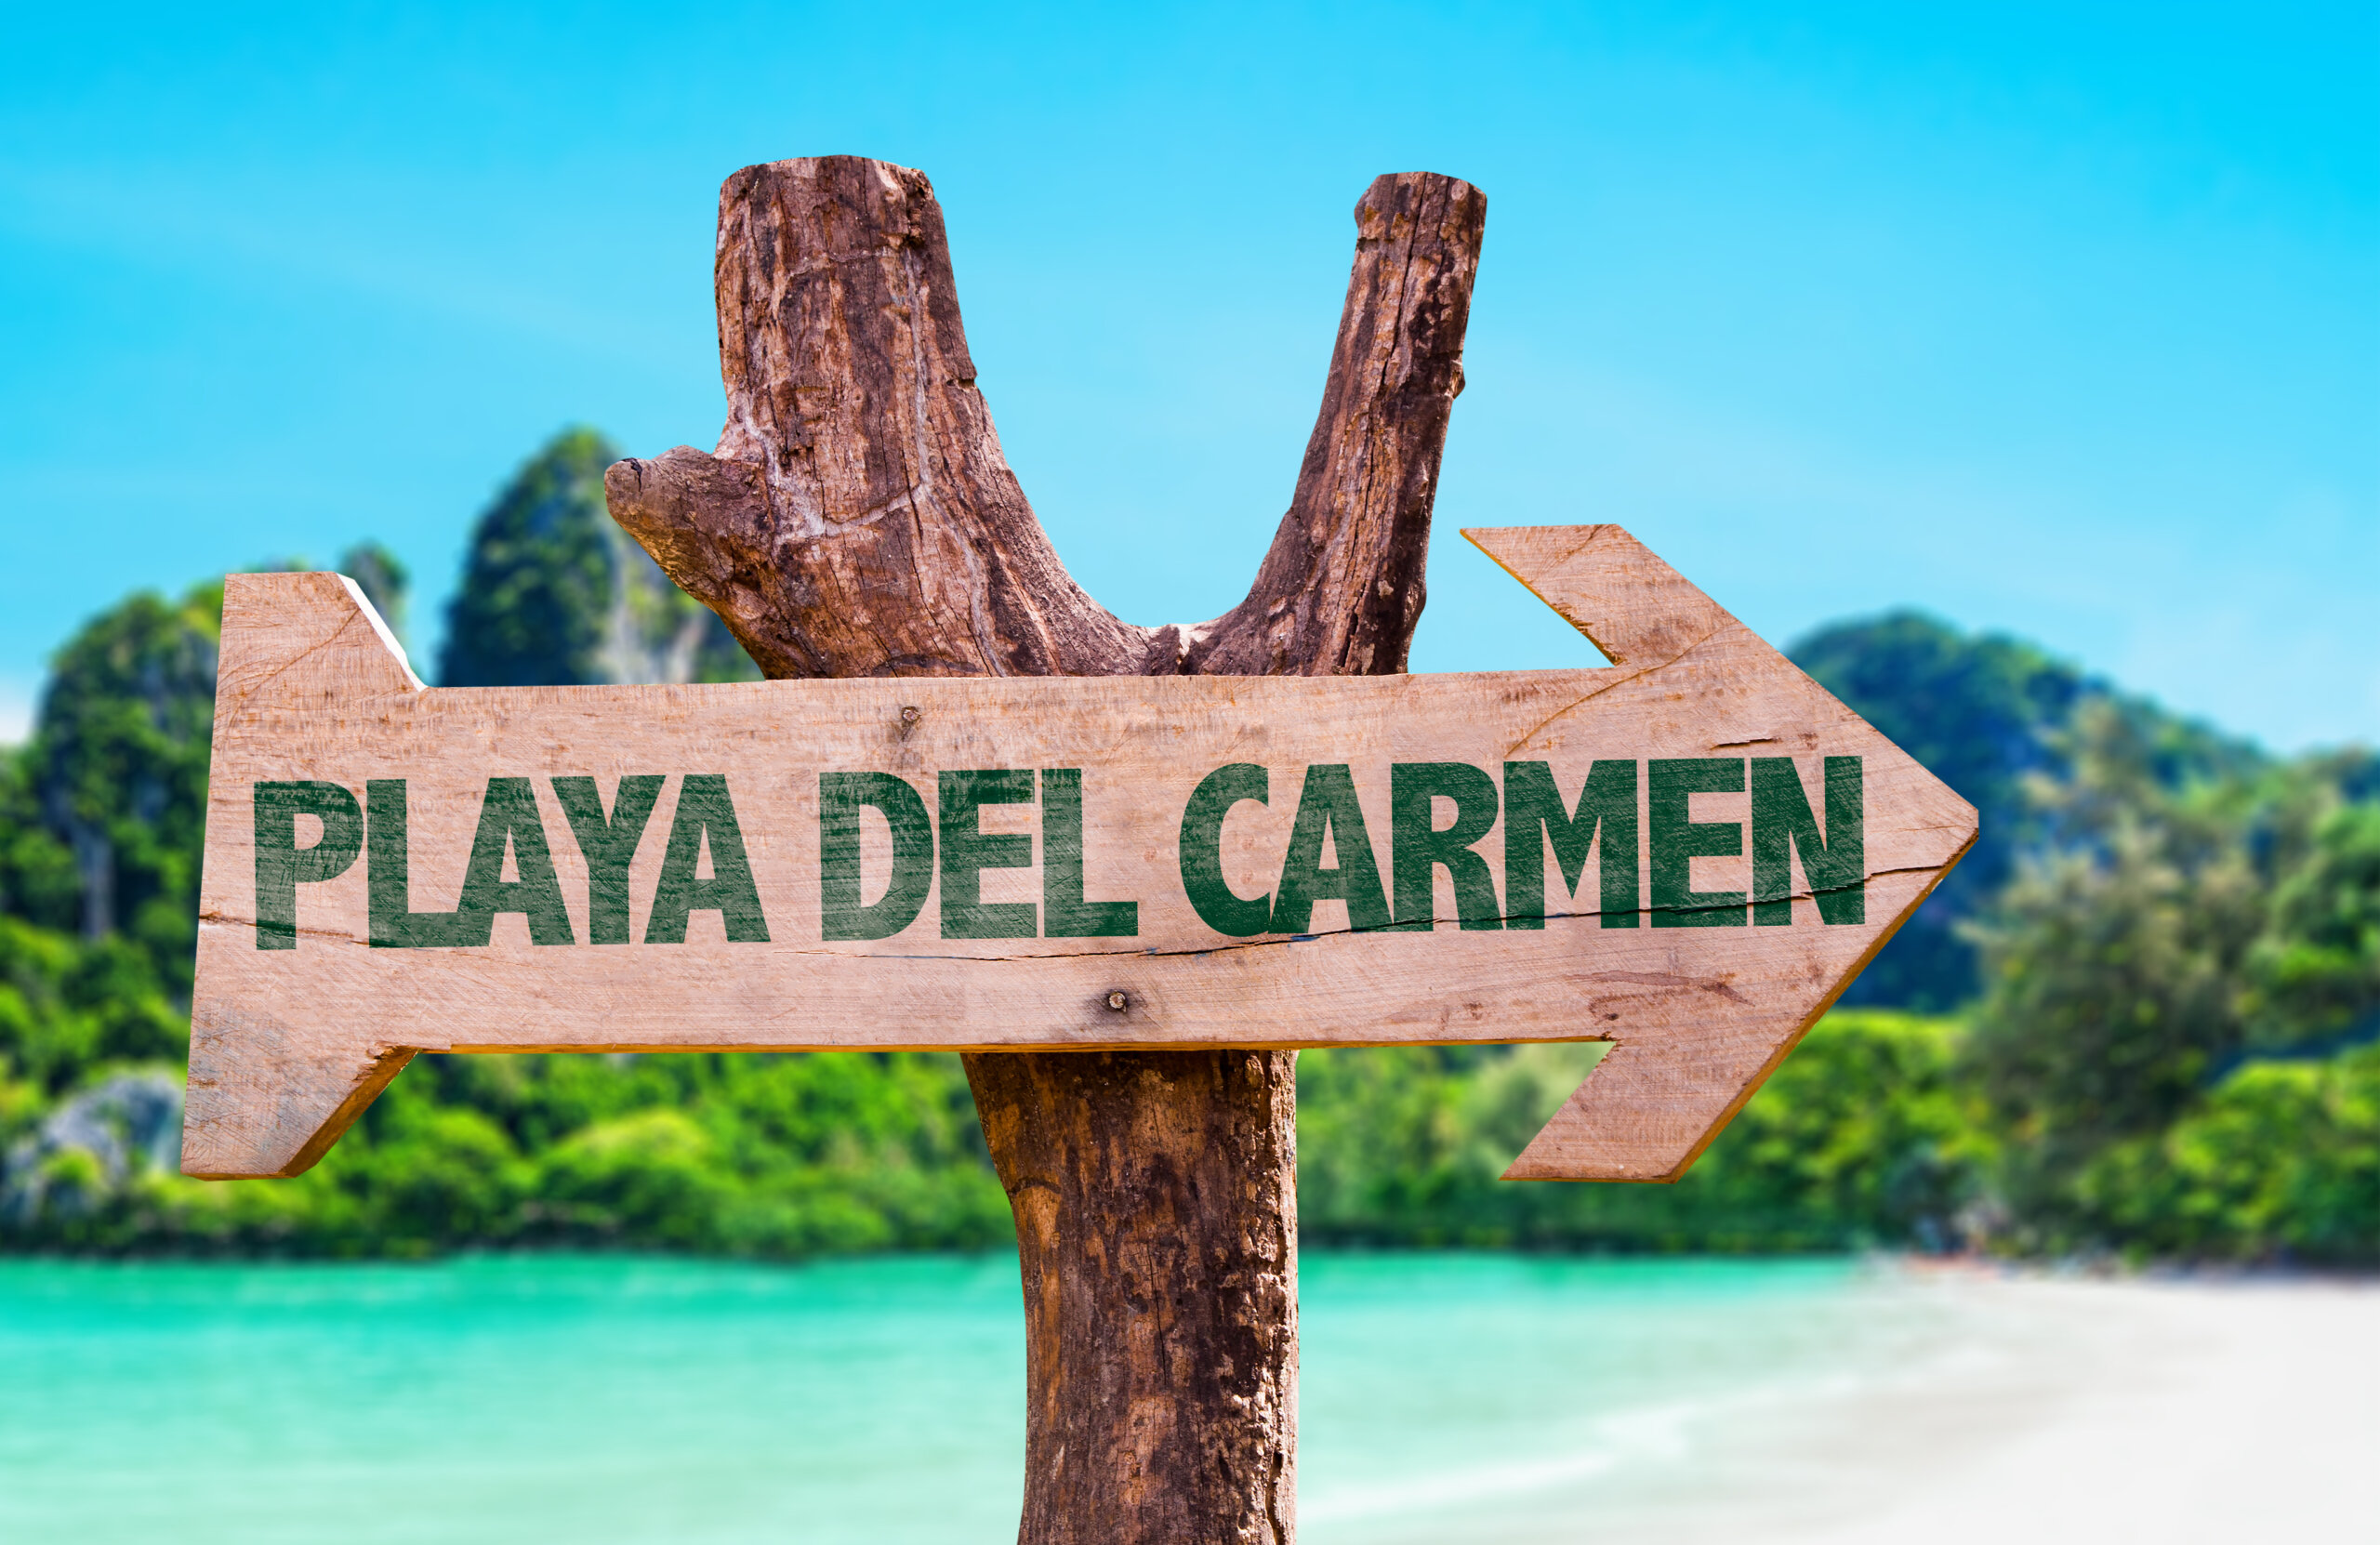 Playa Del Carmen wooden sign with beach background